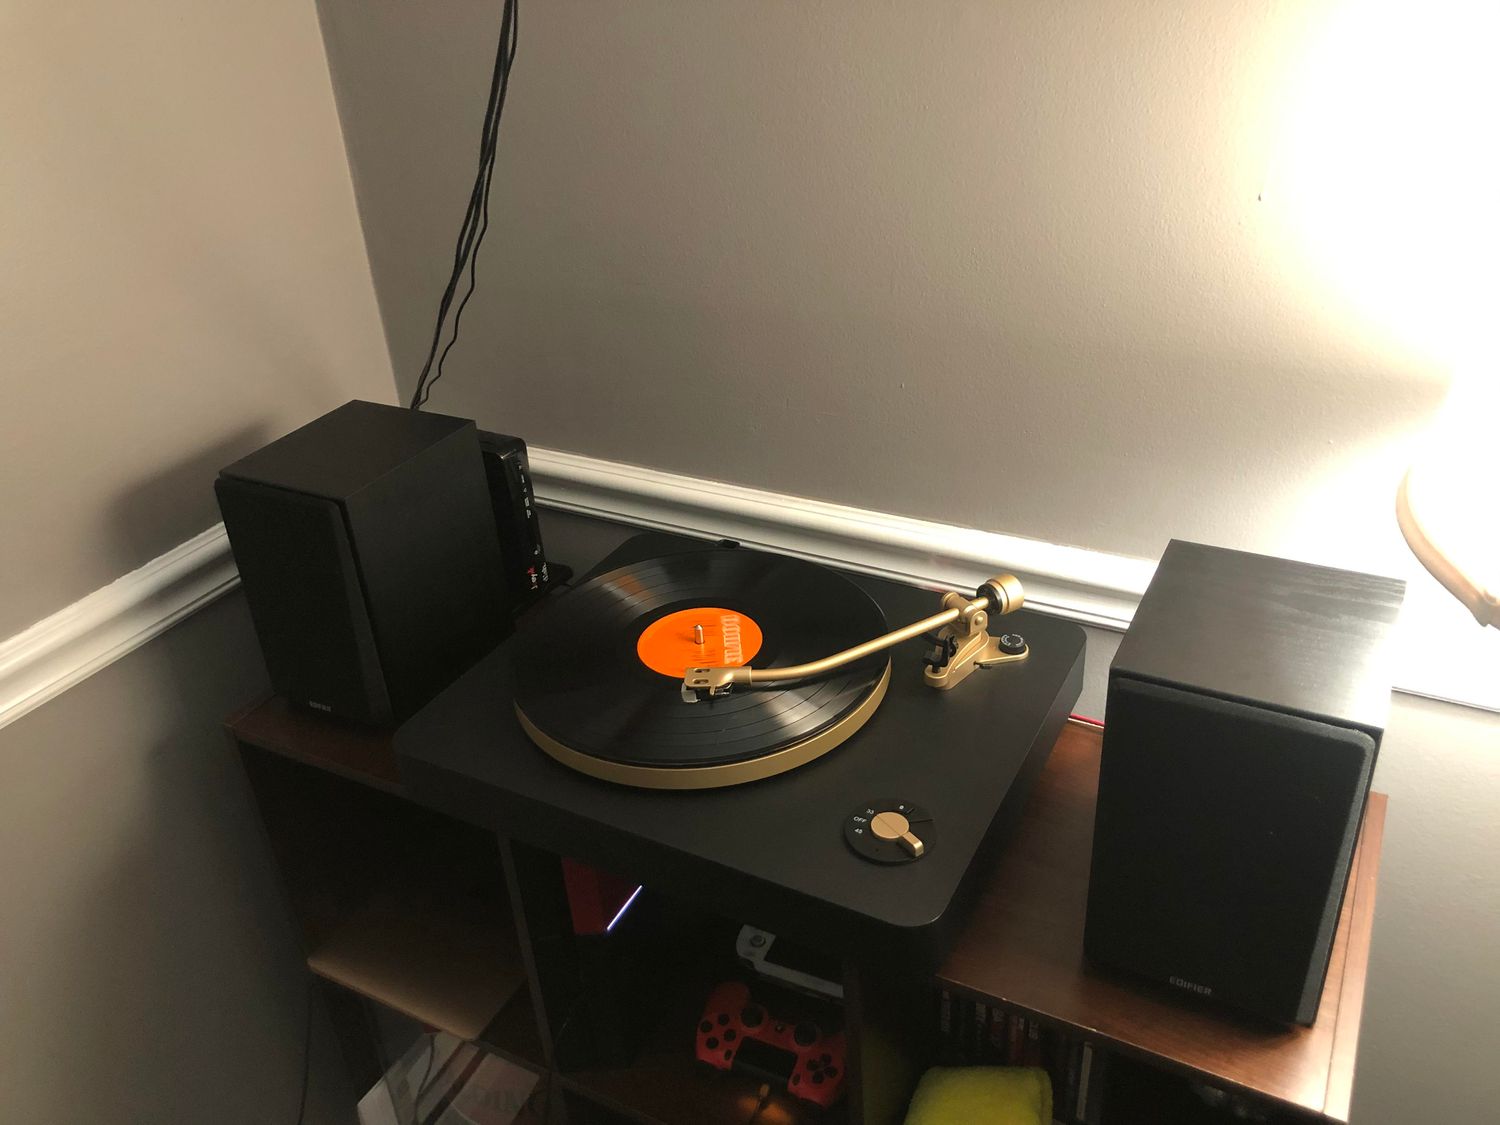 How To Connect Edifier Speakers To Turntable